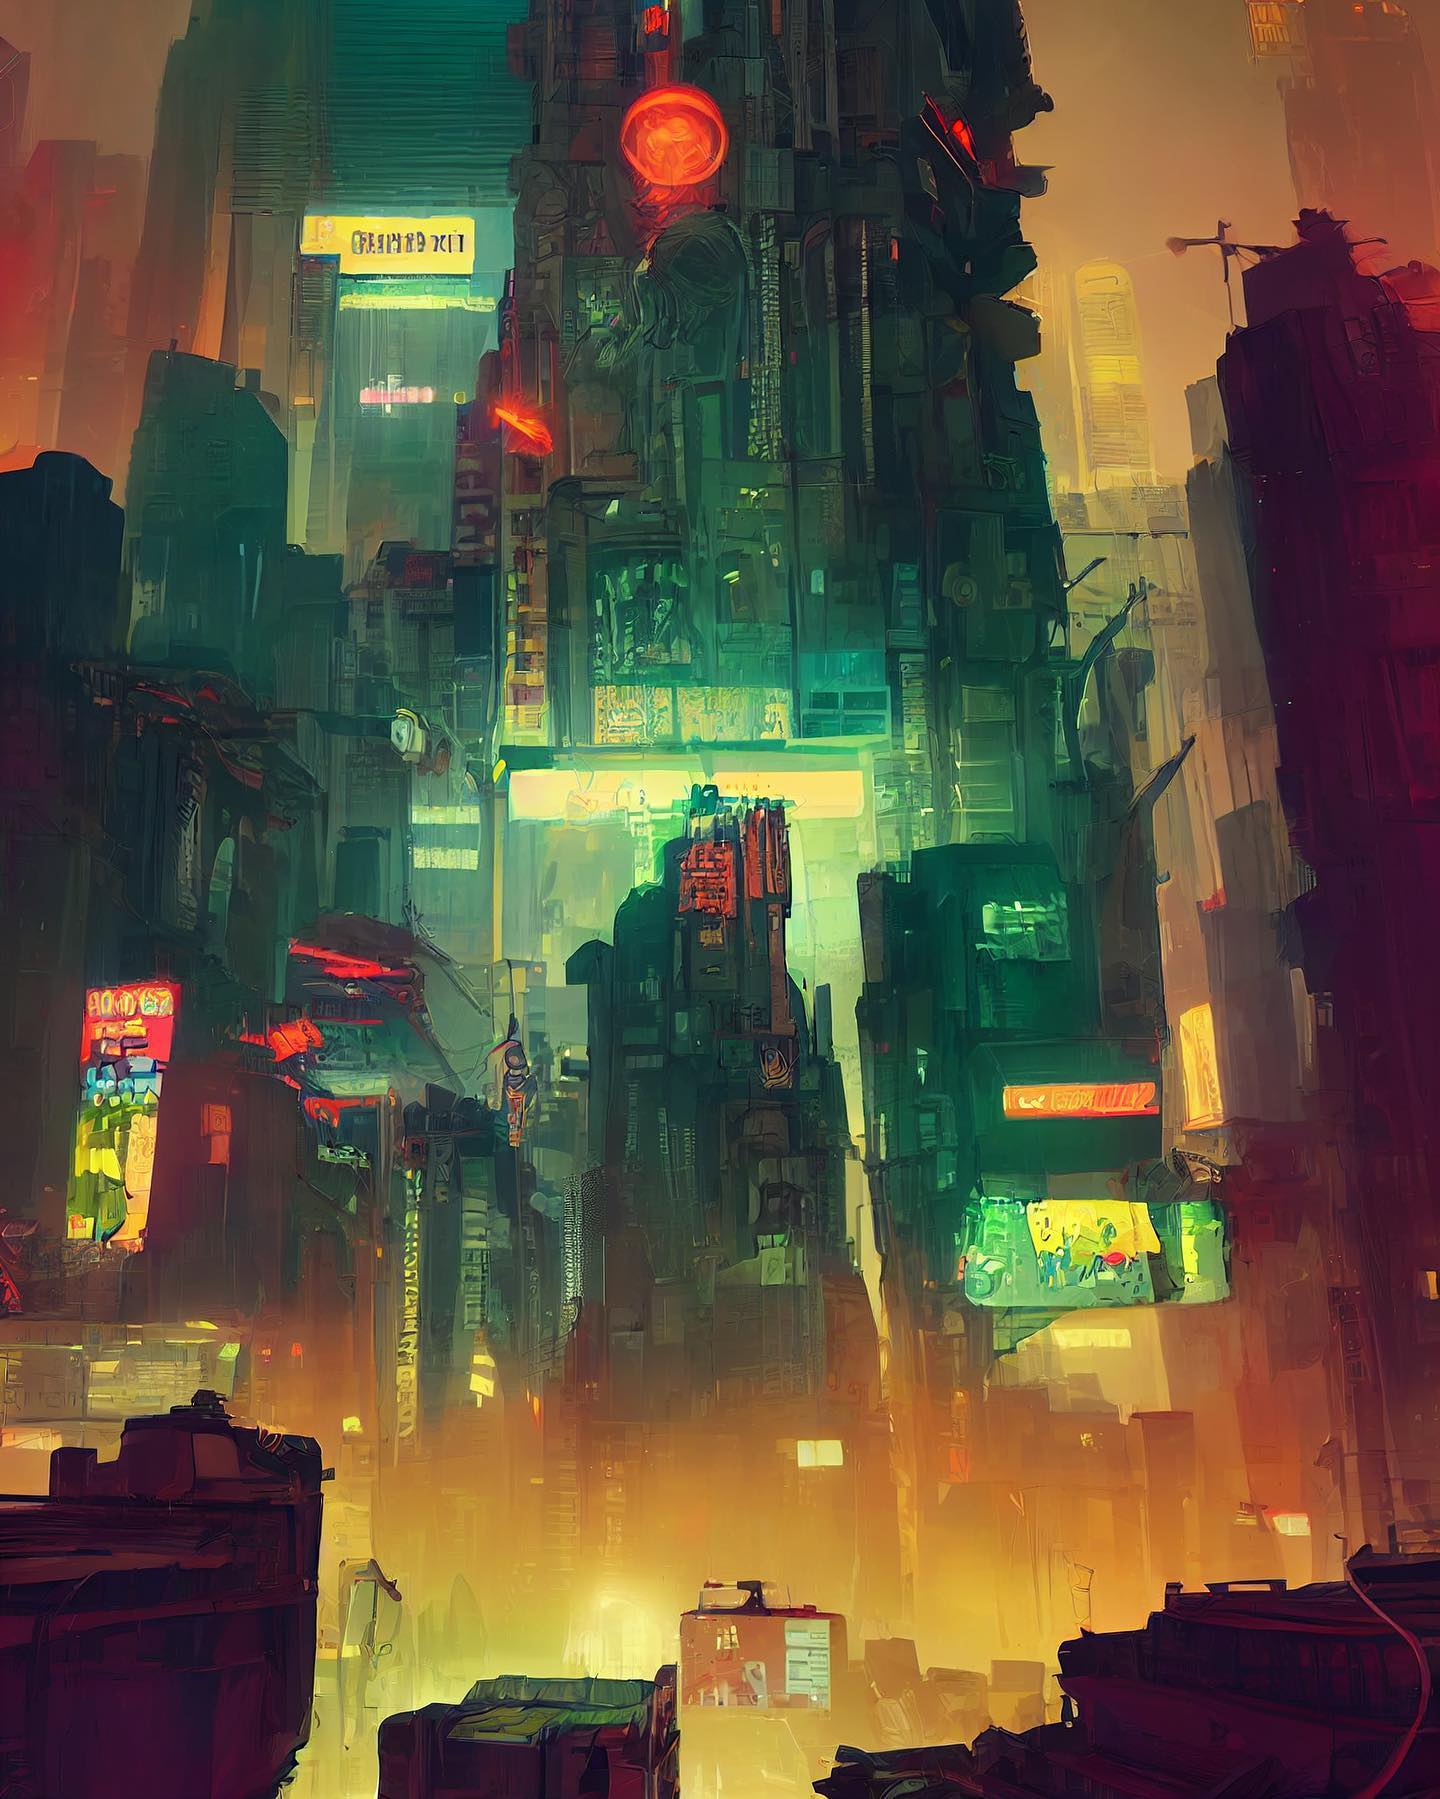 The images are evocative of such titles including Blade Runner and Akira. Image credit: Fadzlishah Johanabas